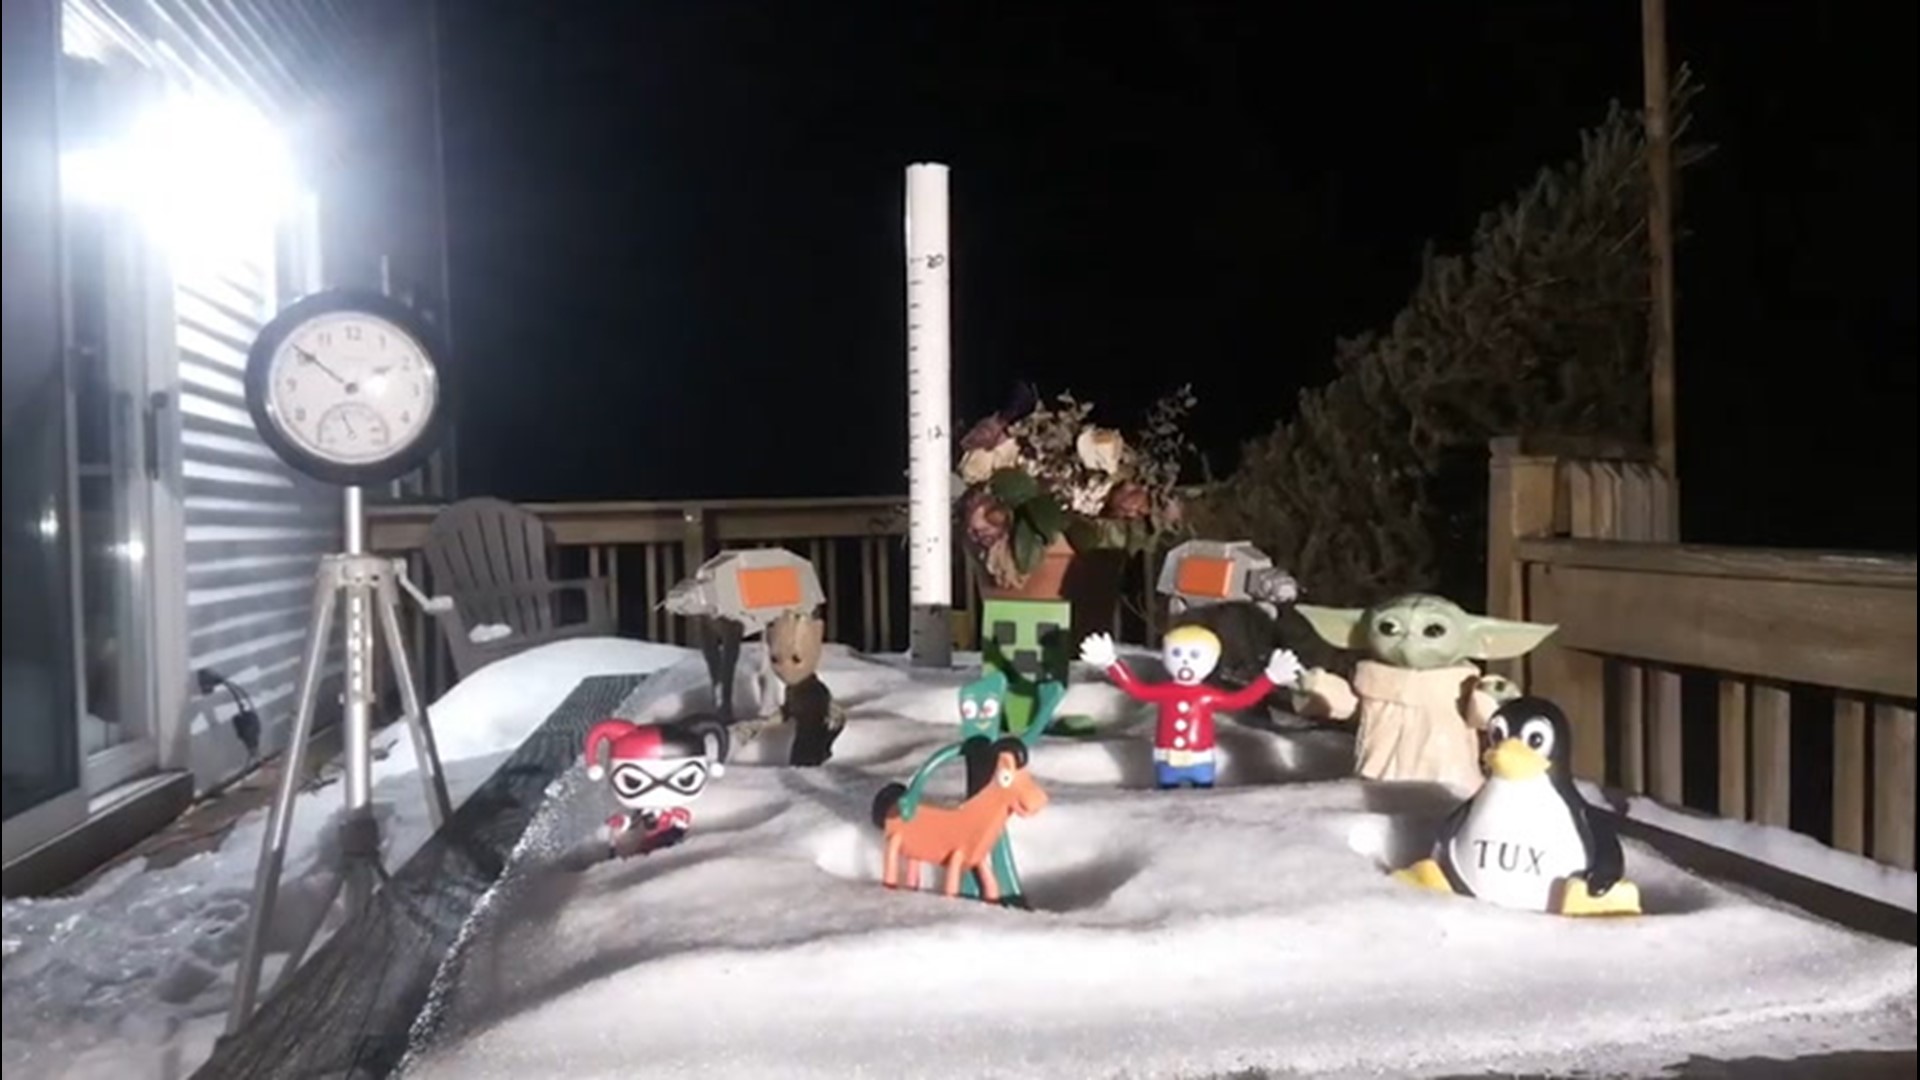 Temperatures rose into the 40s on the night of Feb. 24-25, in Apalachin, New York. It was warm enough for snow to melt and reveal some figures buried inside.